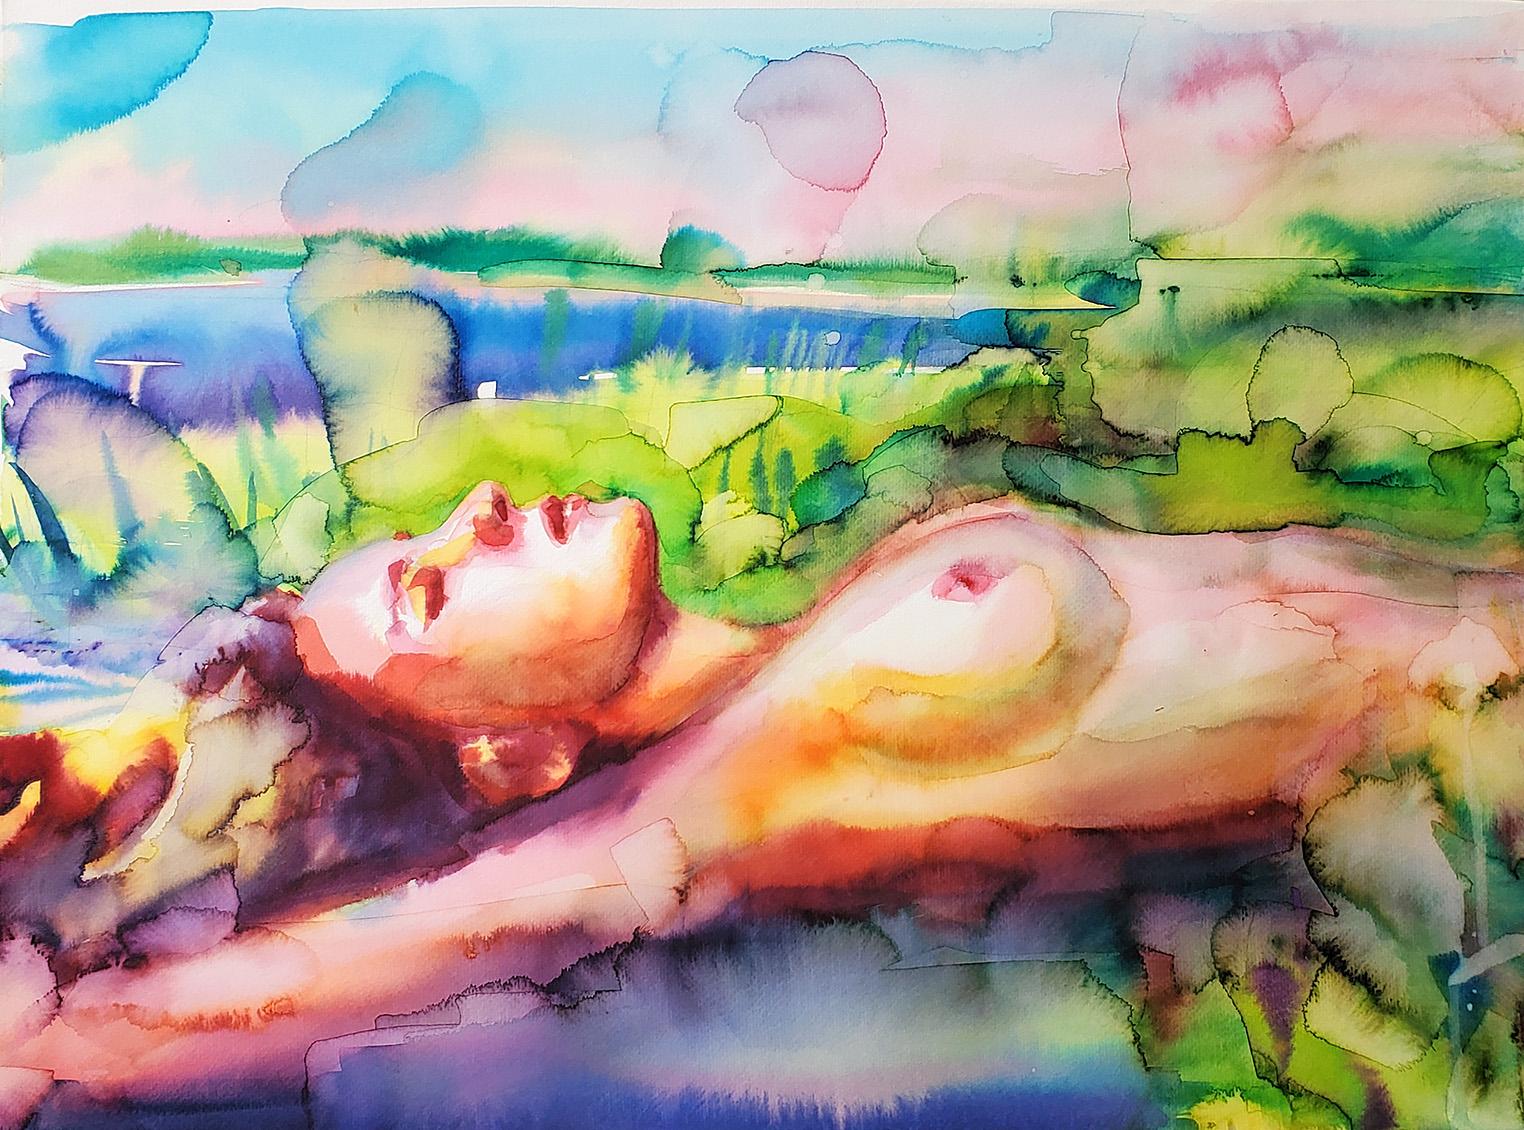 "Dreaming by the River" Figurative Drawing, Nude, Vibrant, Watercolor, Framed